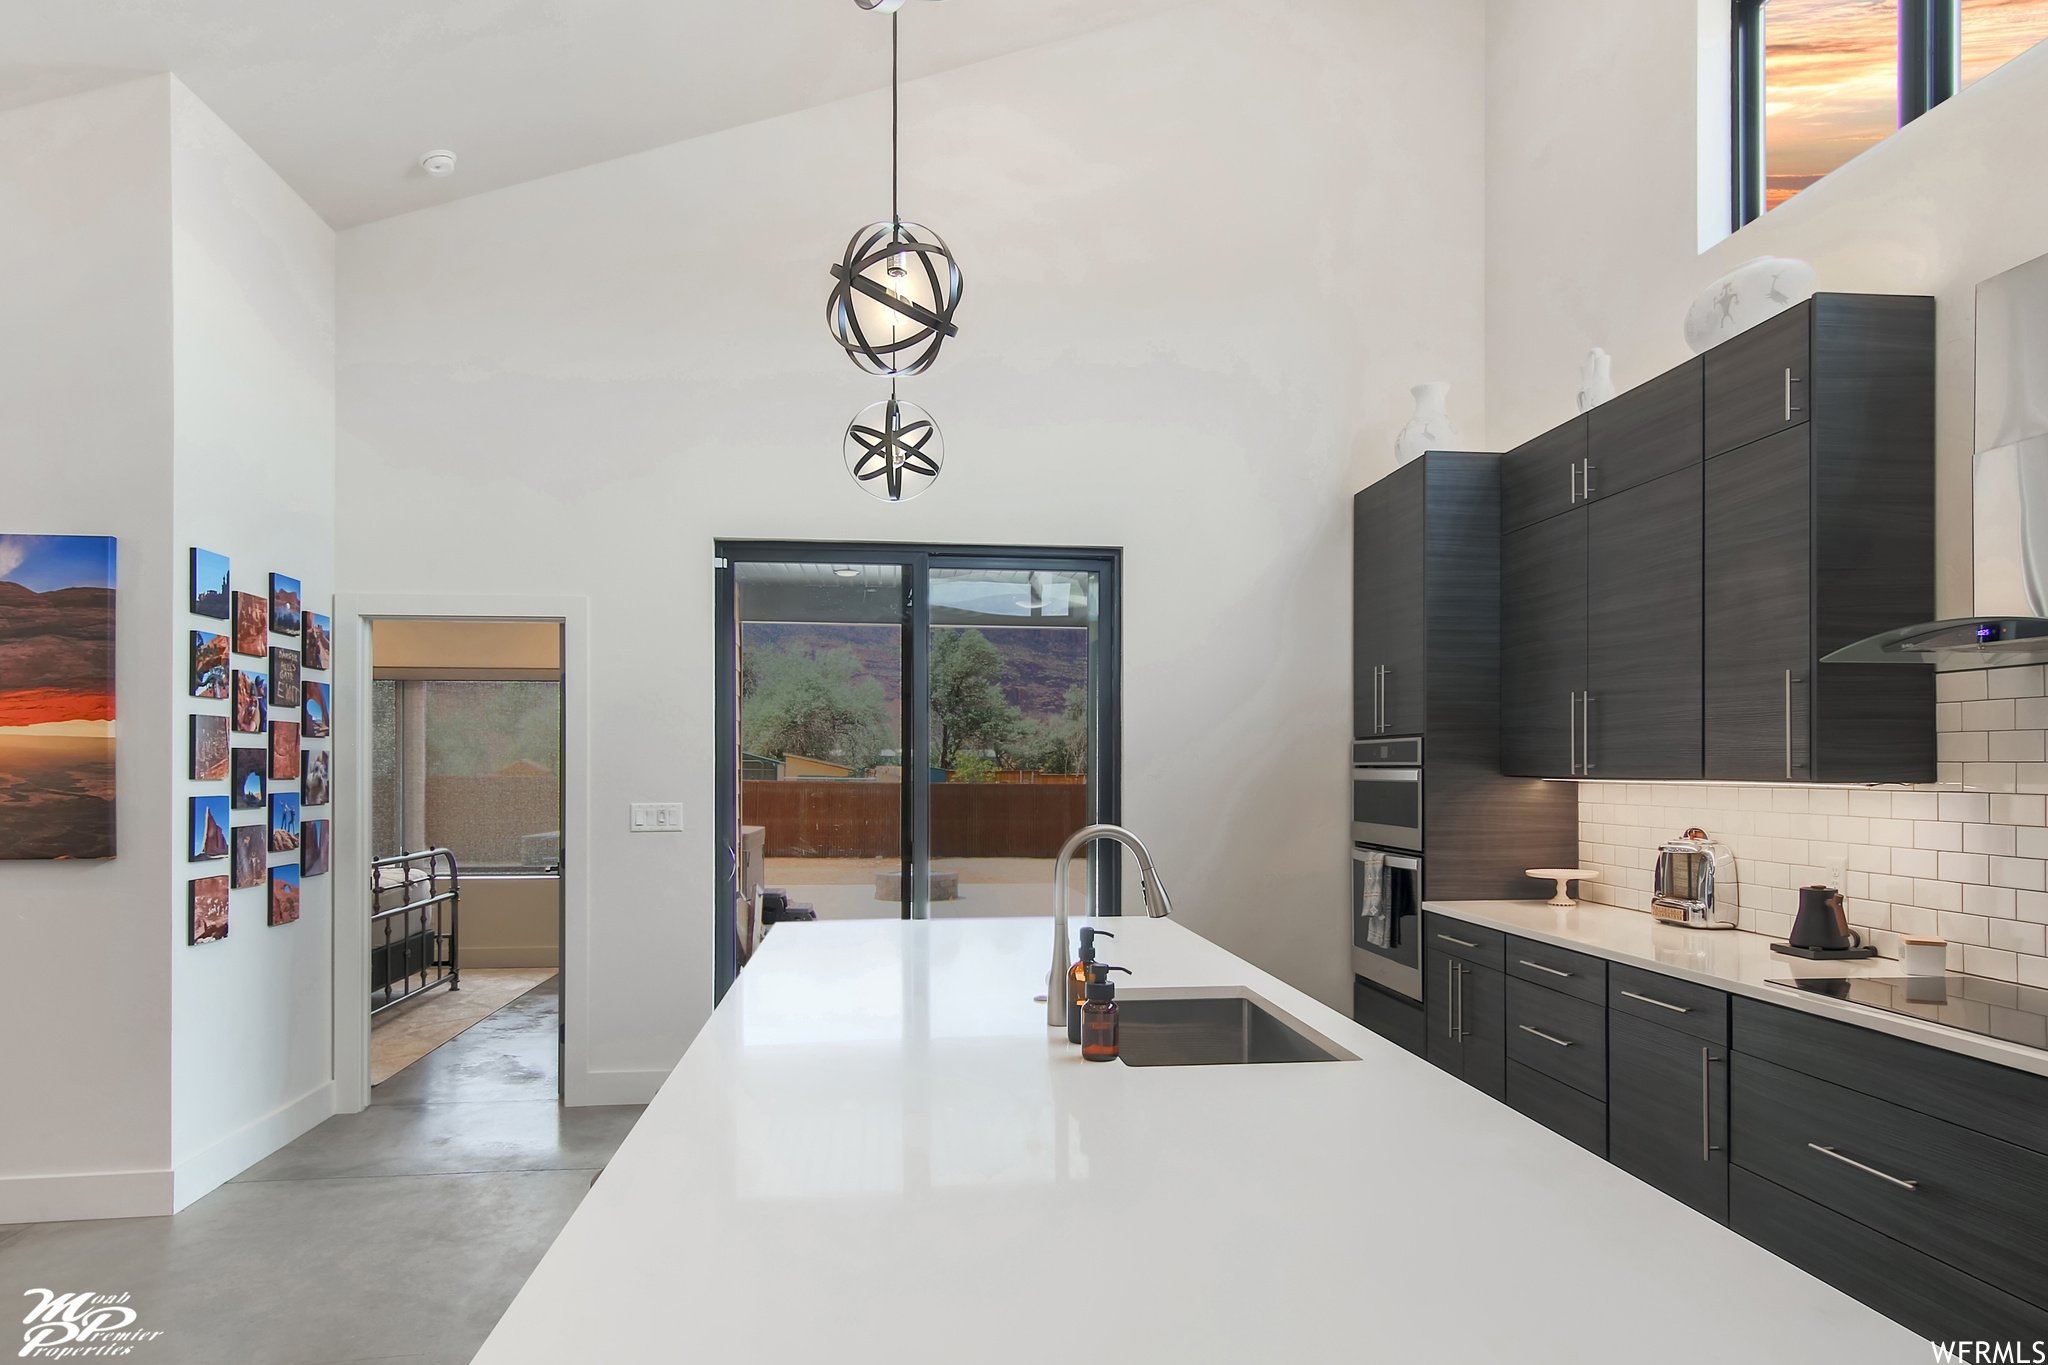 Kitchen featuring stainless steel double oven, lofted ceiling, decorative light fixtures, dark brown cabinetry, light countertops, backsplash, a high ceiling, and black electric cooktop